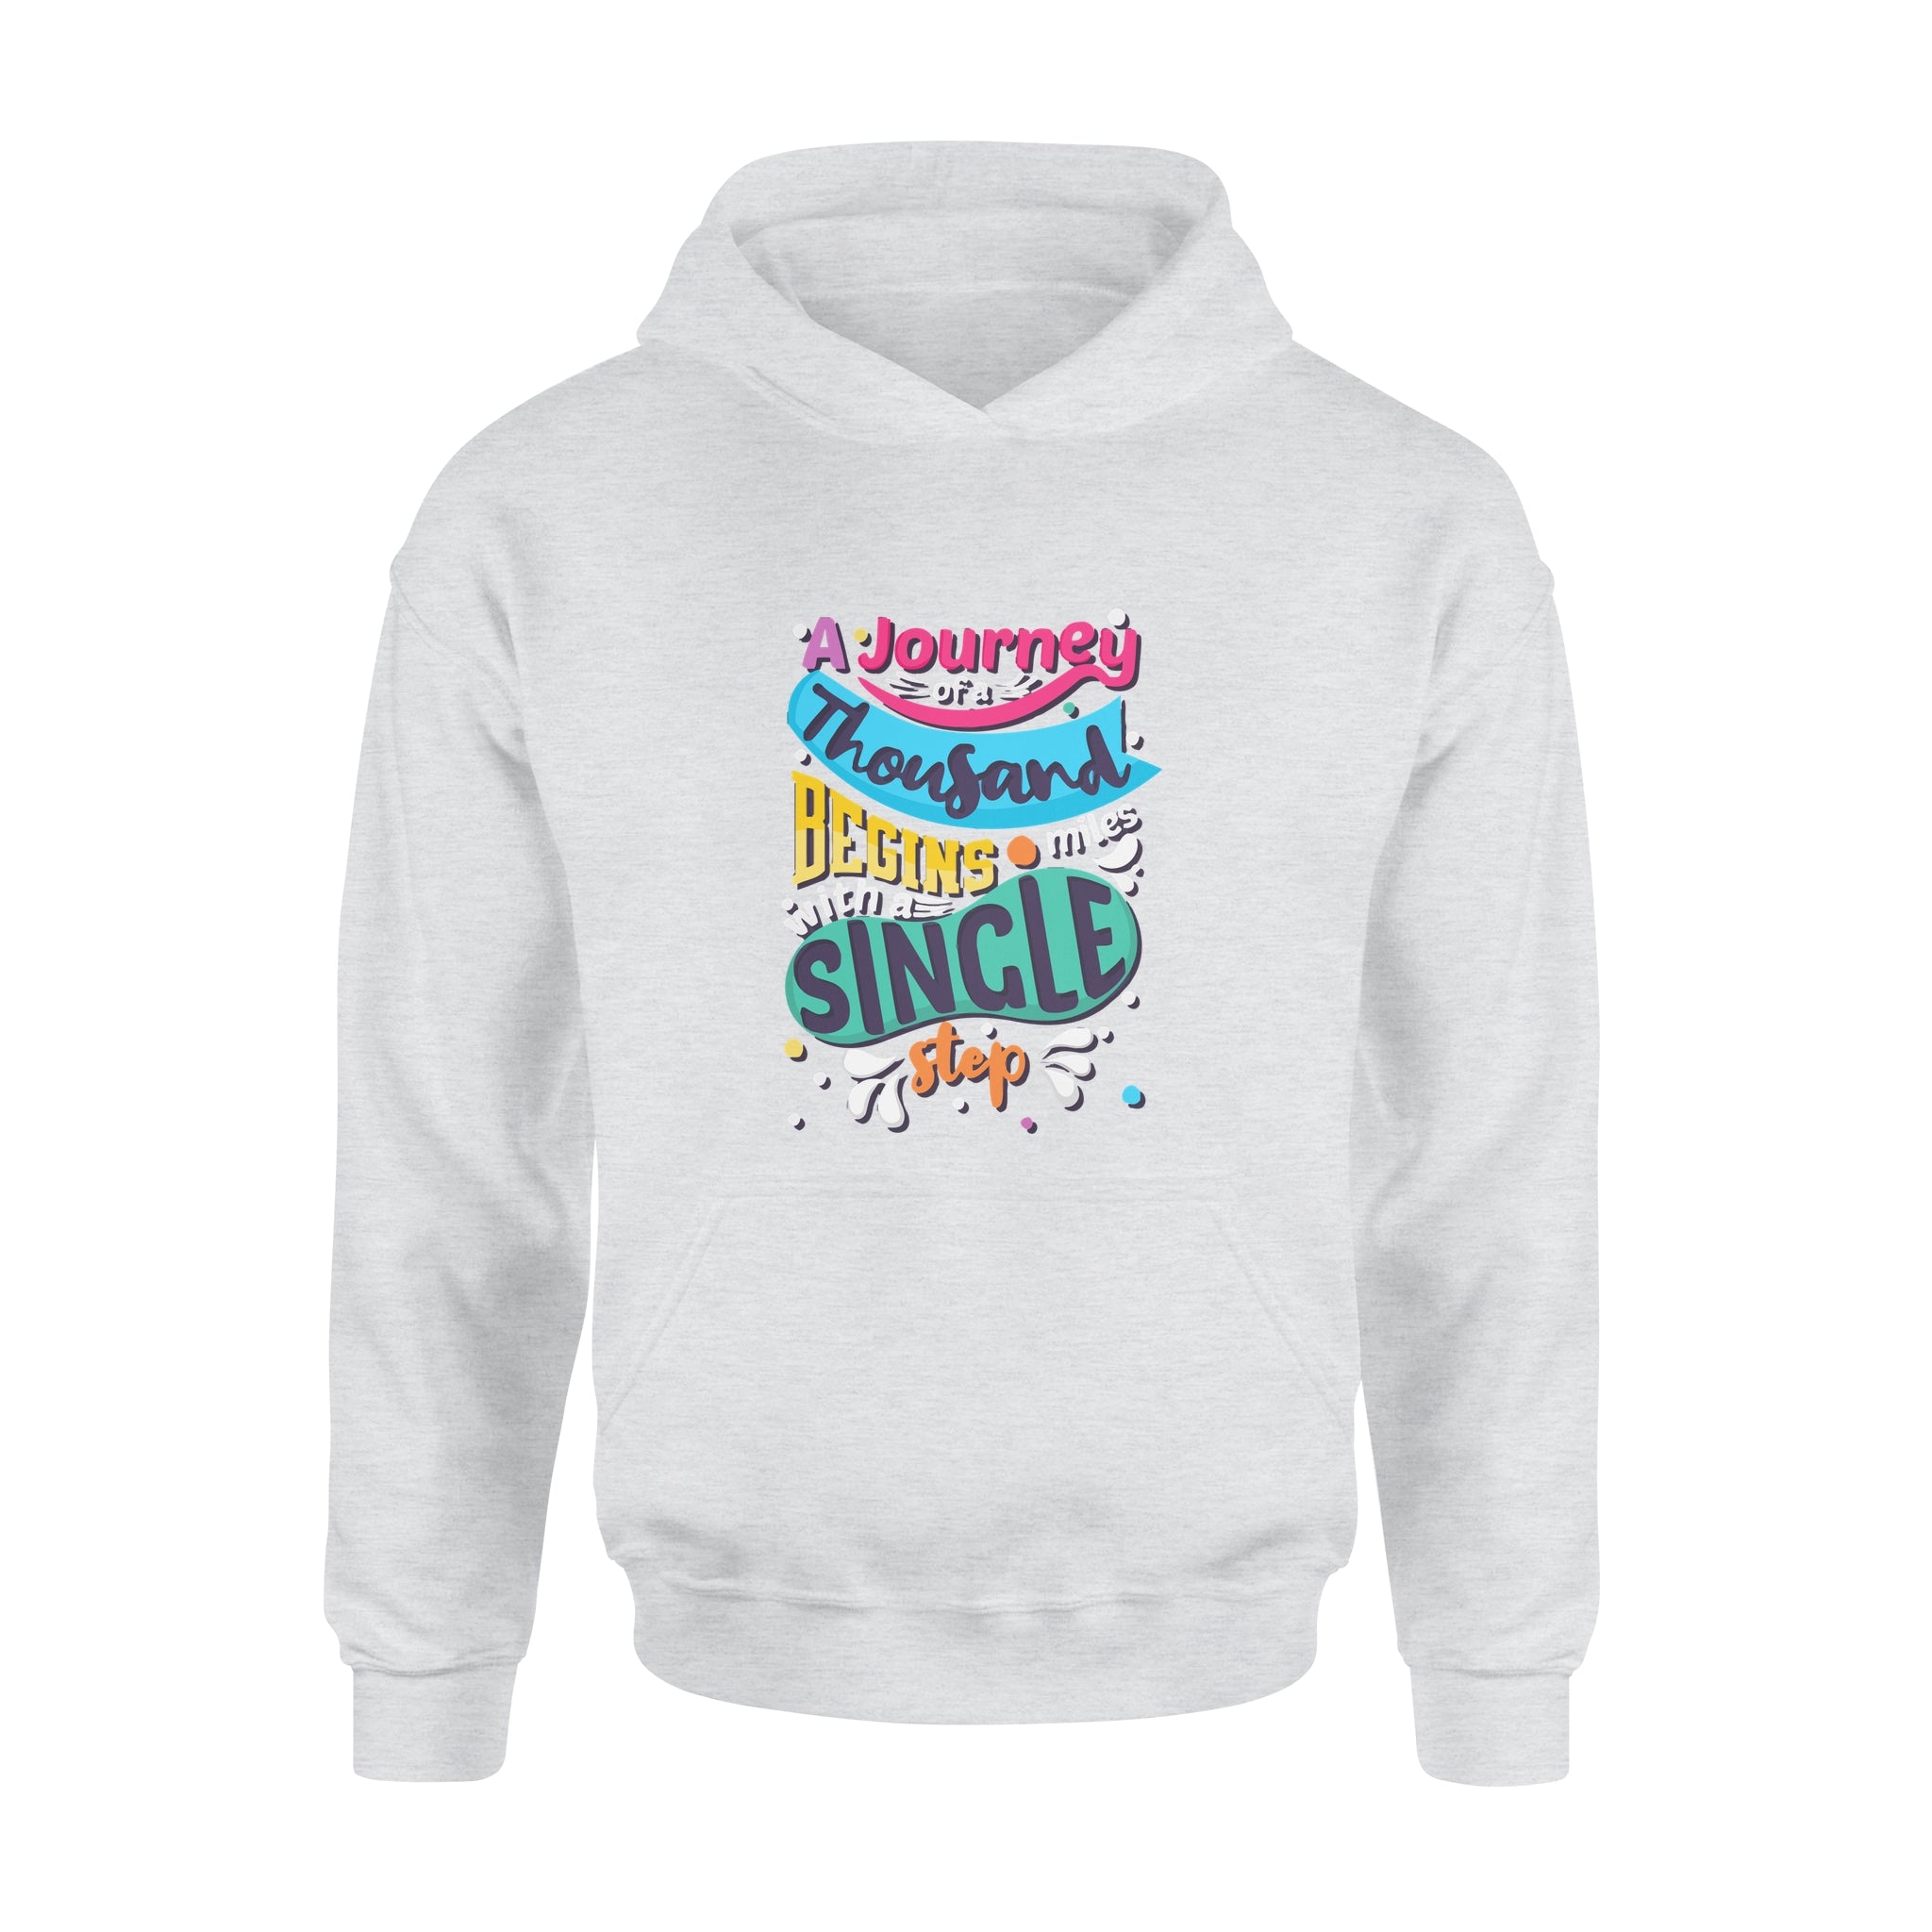 Aj Journey of a Thousand Miles Begins with a Single Step - Hoodie